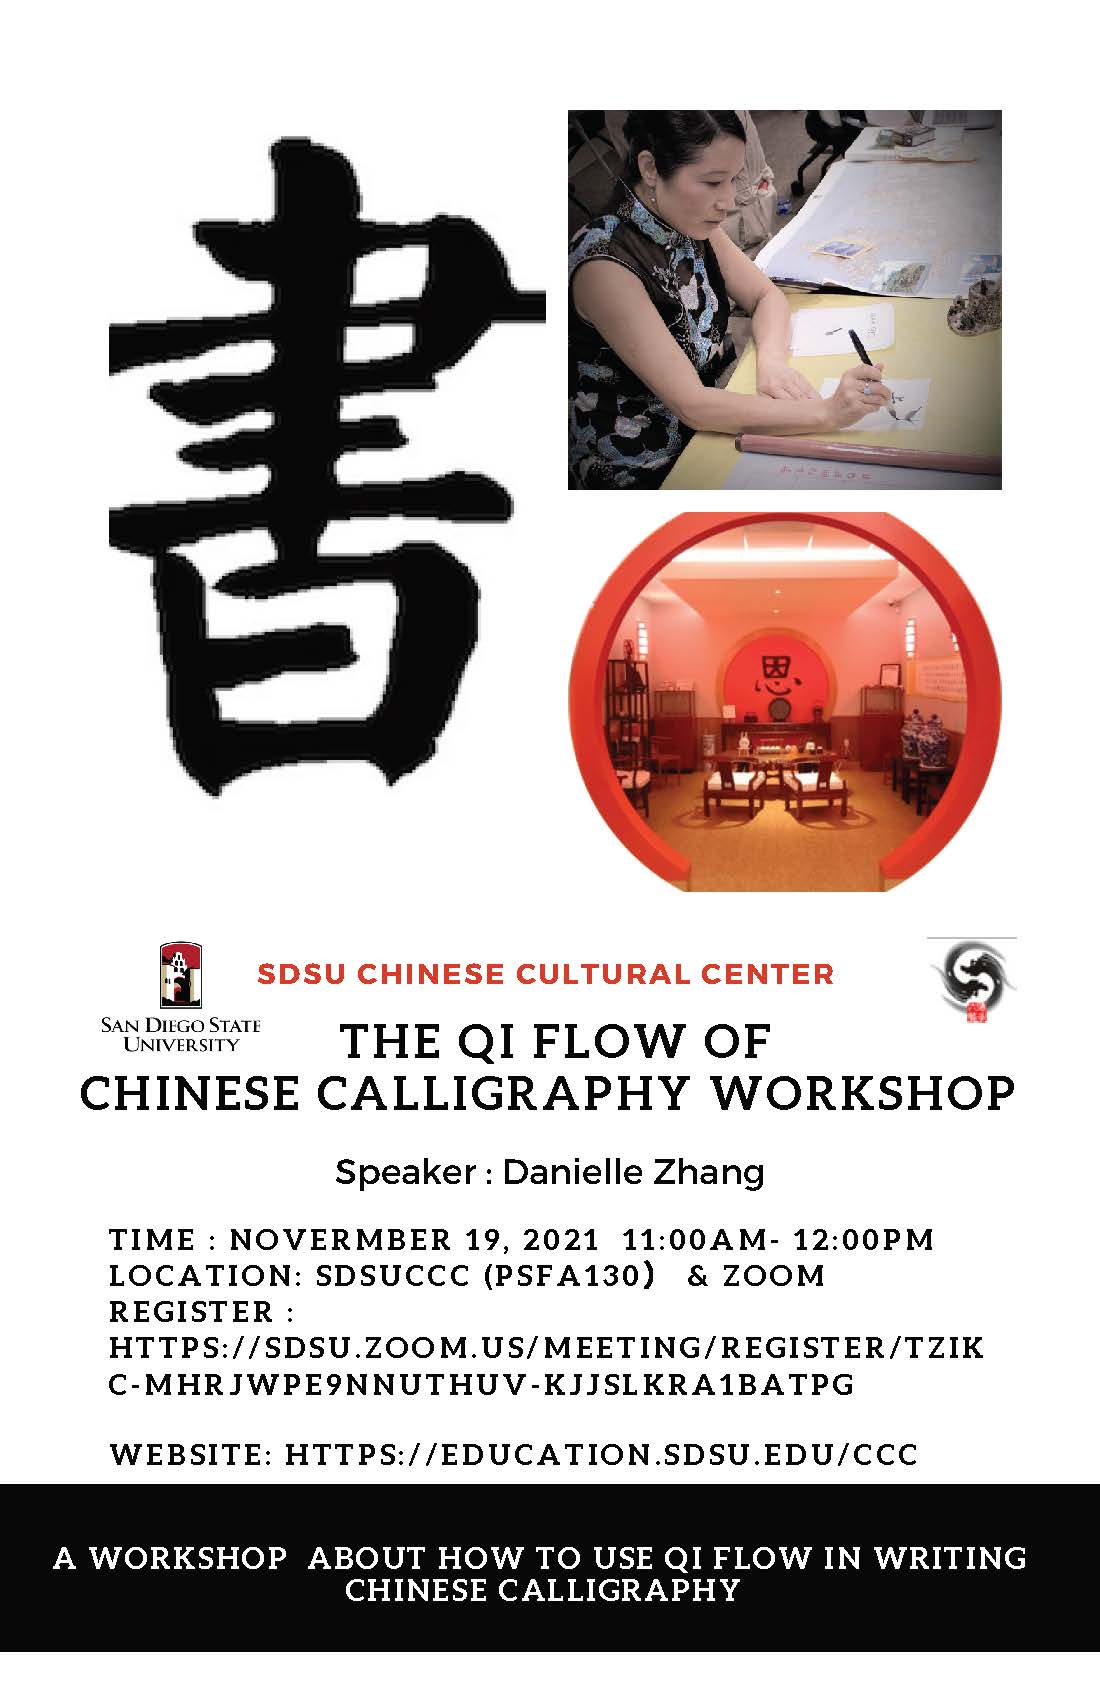 THE QI FLOW OF CHINESE CALLIGRAPHY WORKSHOP